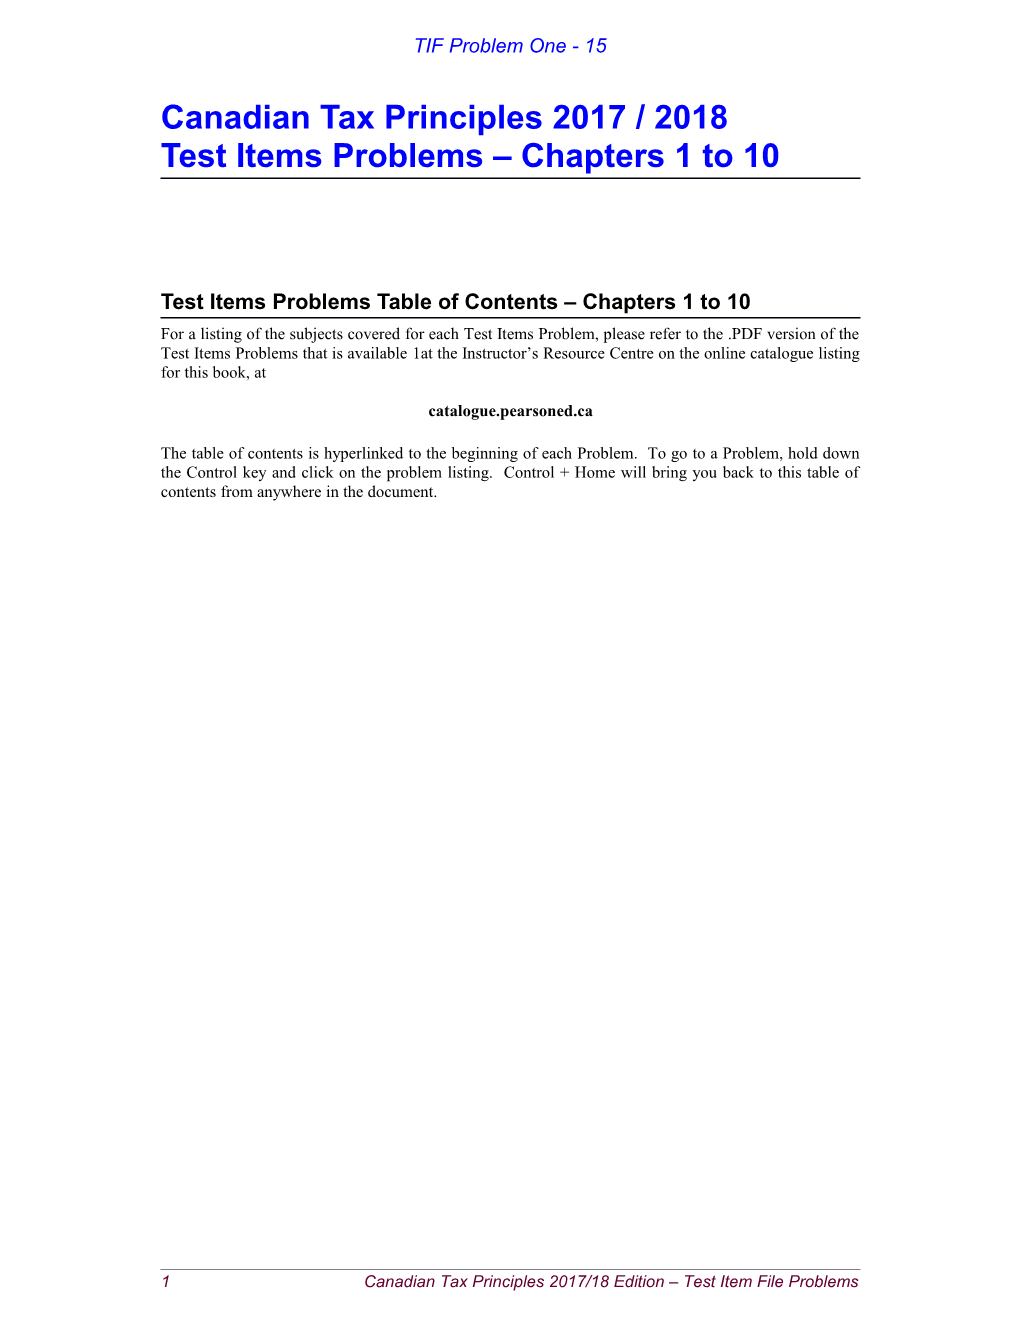 CTP Solutions Manual in Word